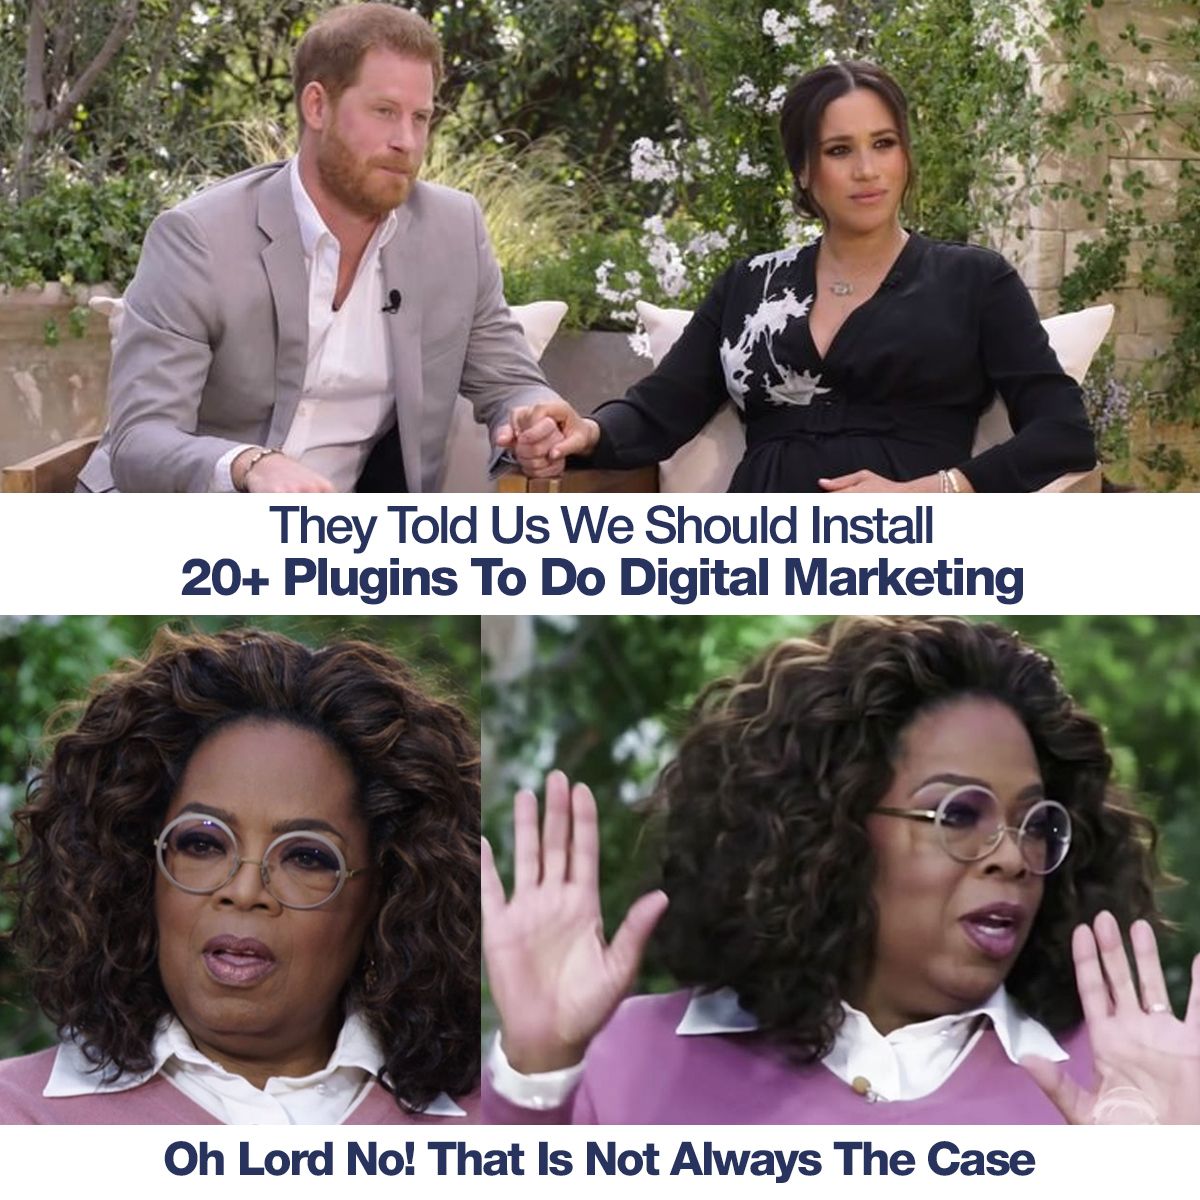 They Told Us We Should Install 20+ Plugins To Do Digital Marketing. Oh Lord No! That Is Not Always The Case